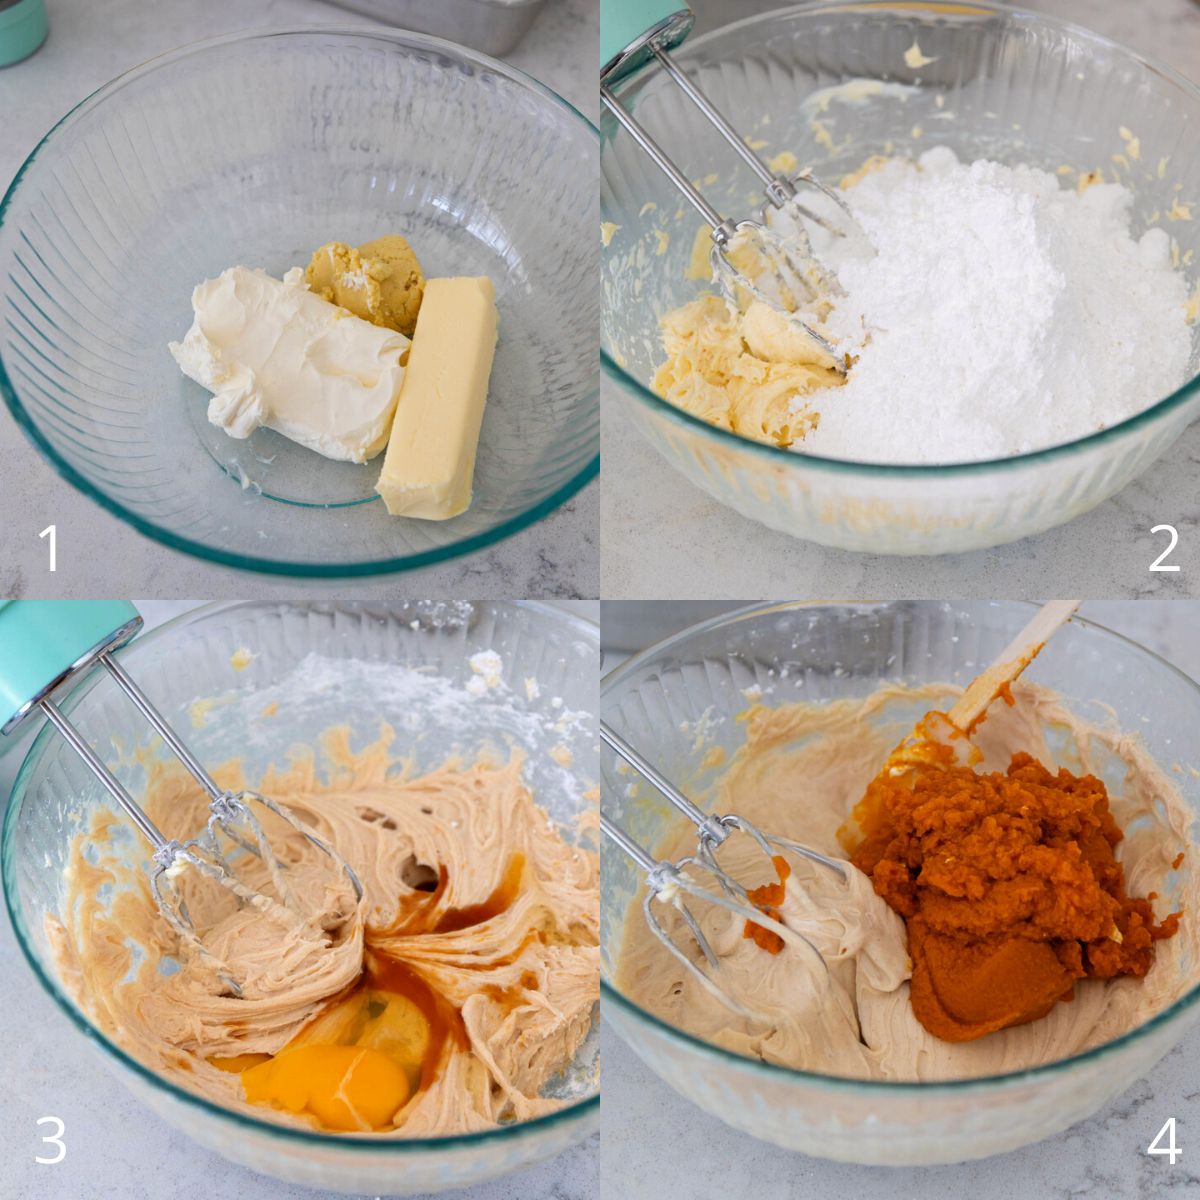 The step by step photos show how to mix together the butter, powdered sugar, spices, and pumpkin puree to form the pumpkin filling.